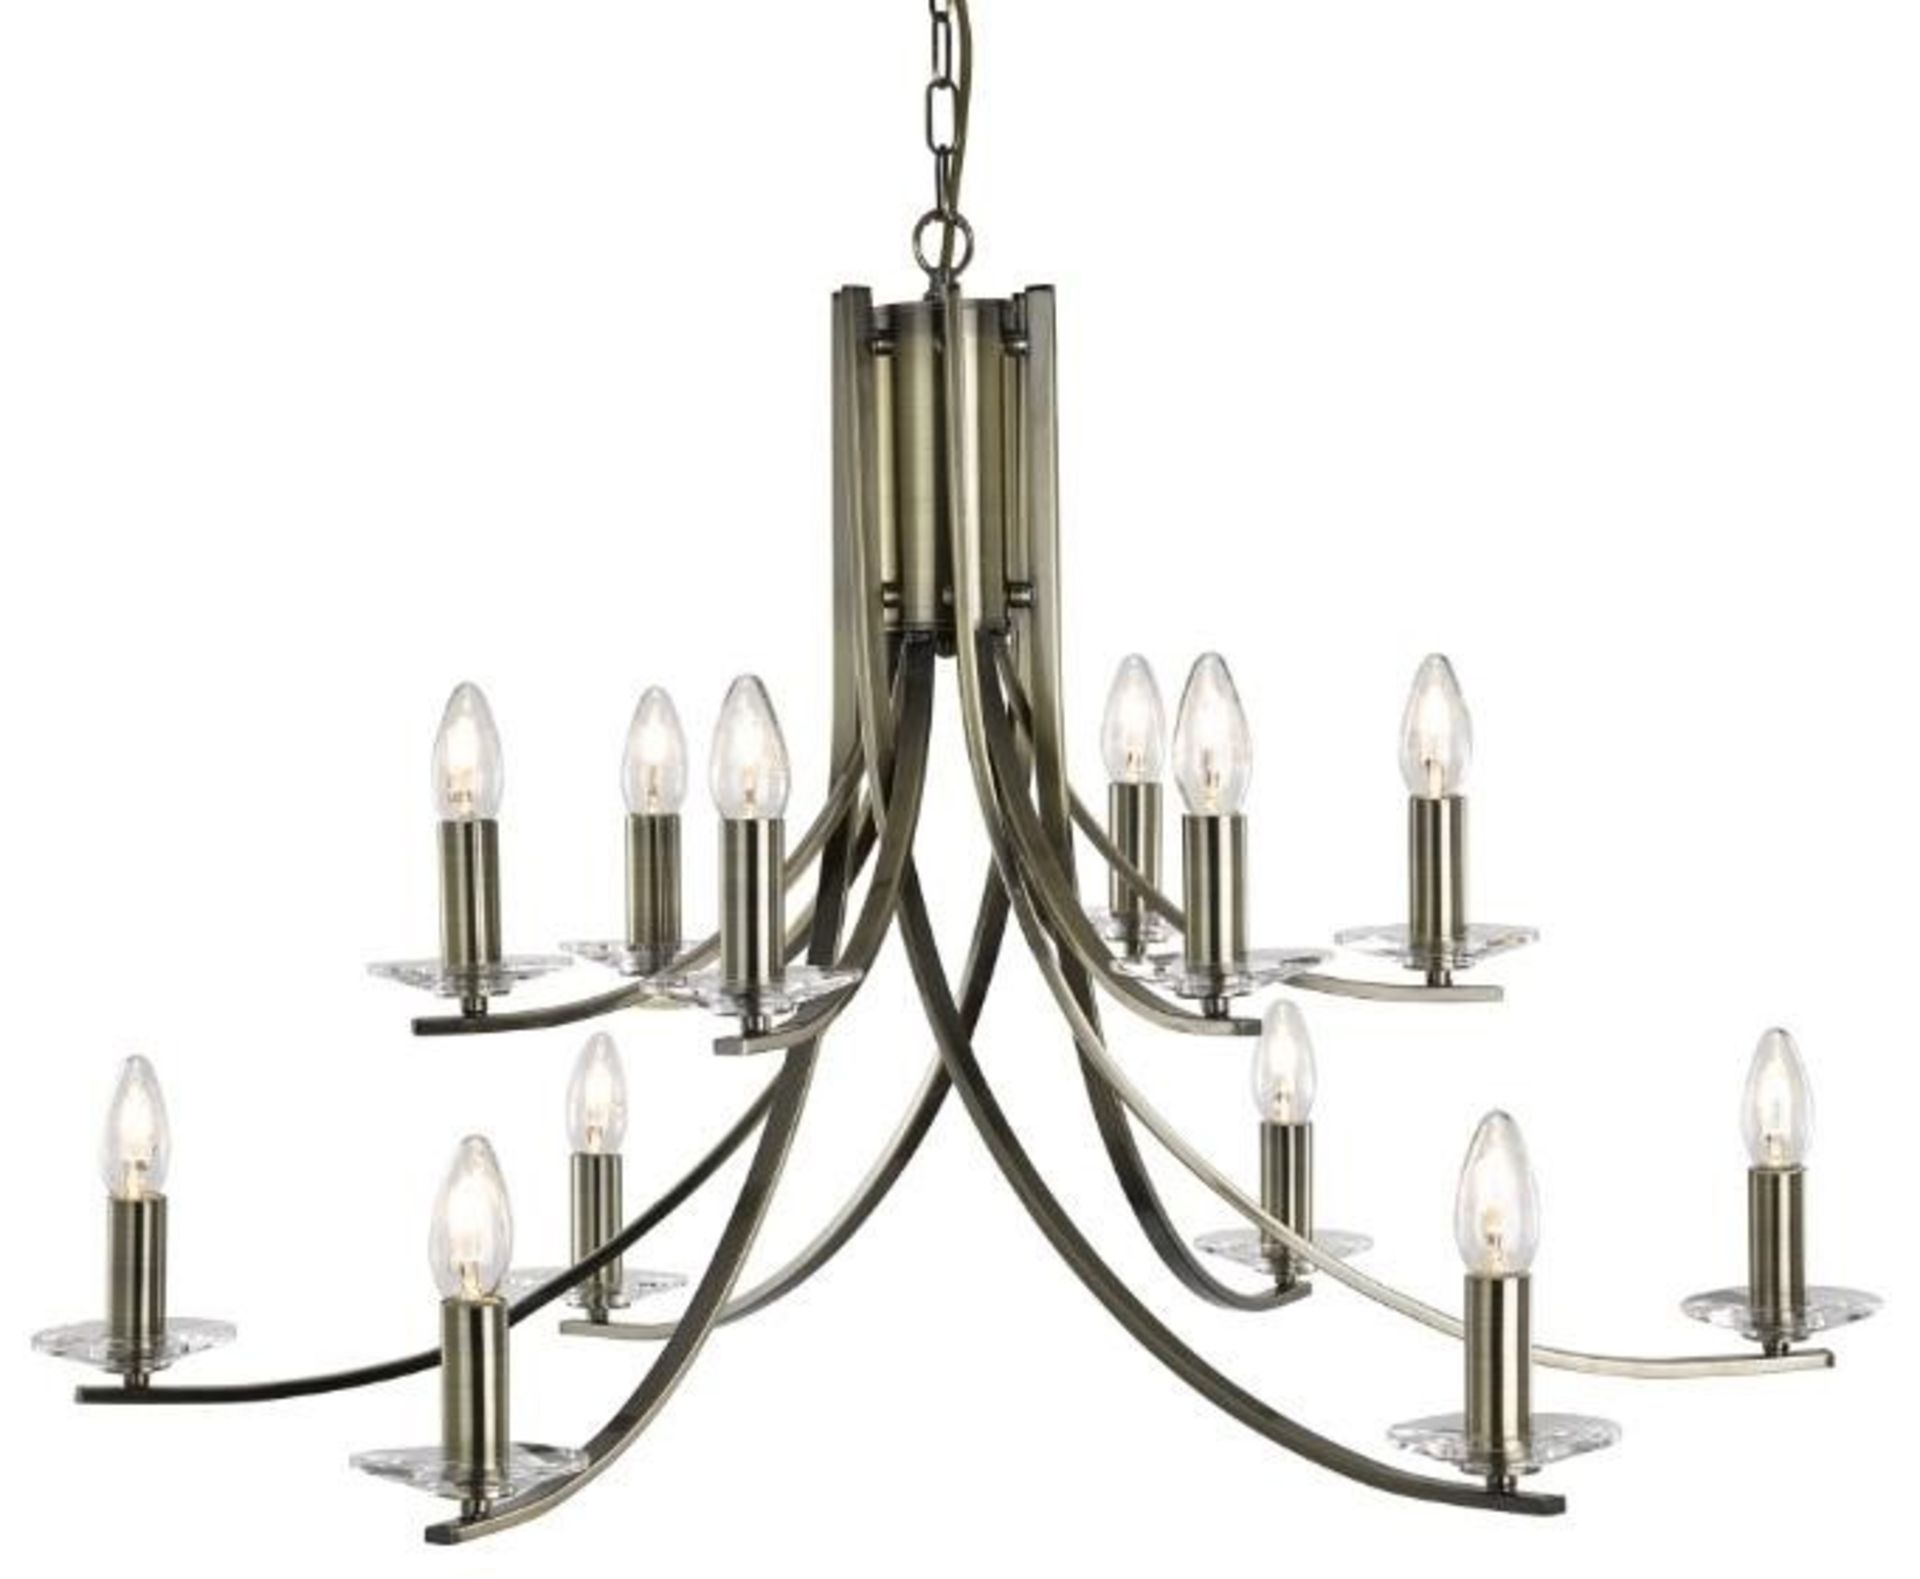 1 x Ascona Antique Brass 12-Light Fitting With Clear Glass Sconces - Ex Display Stock - CL298 - Ref: